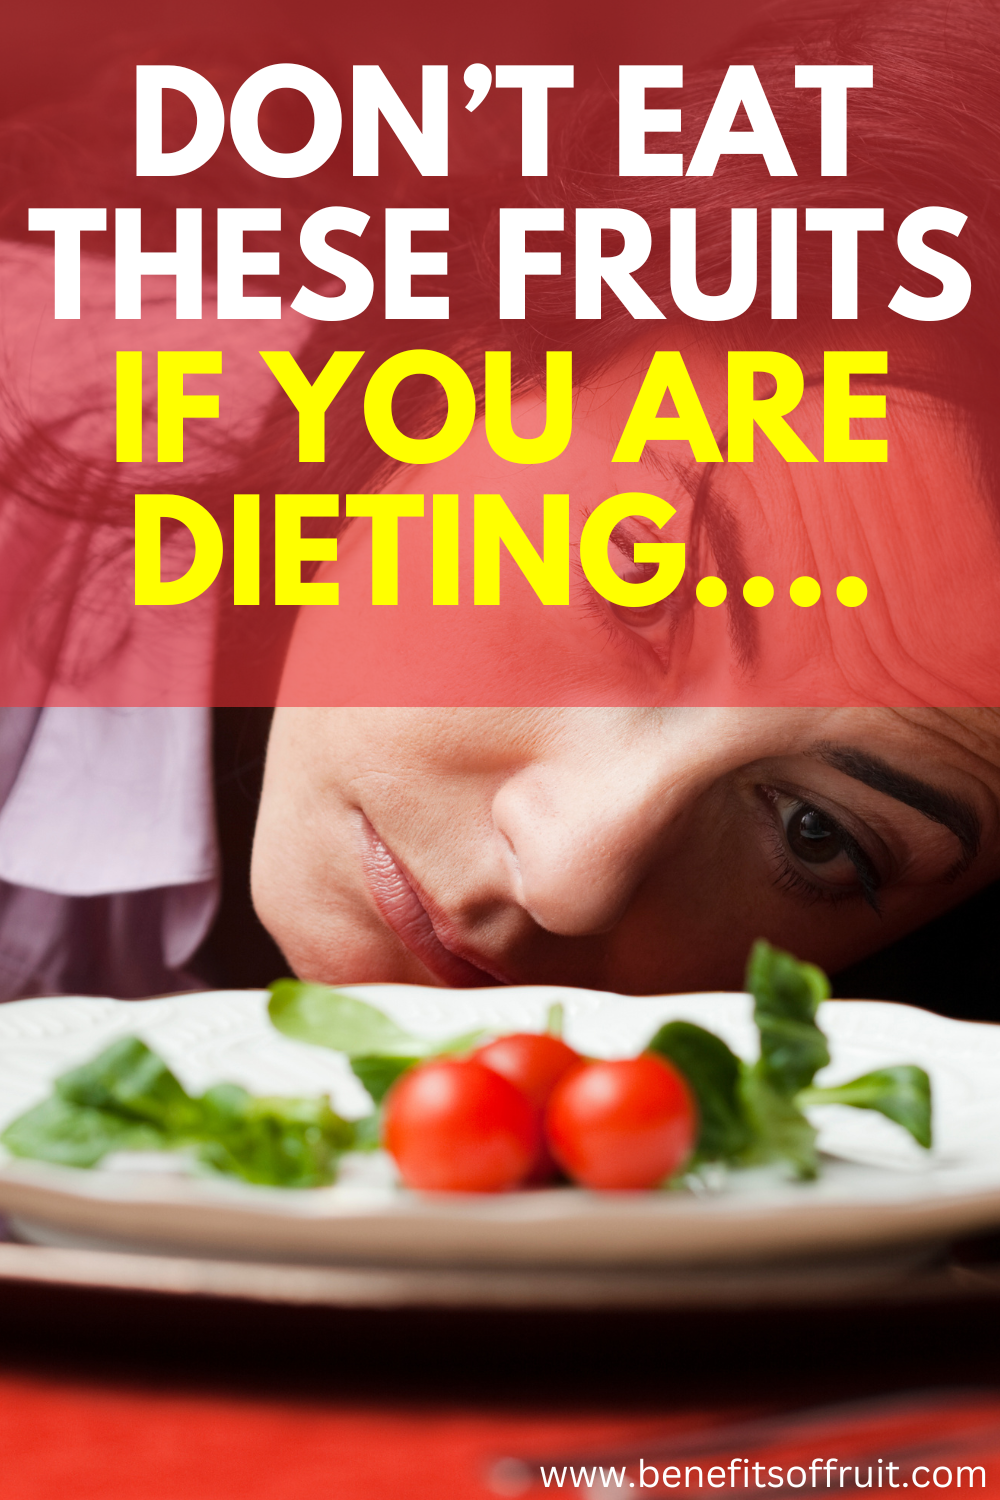 Don’t Eat These Fruits If You are Dieting